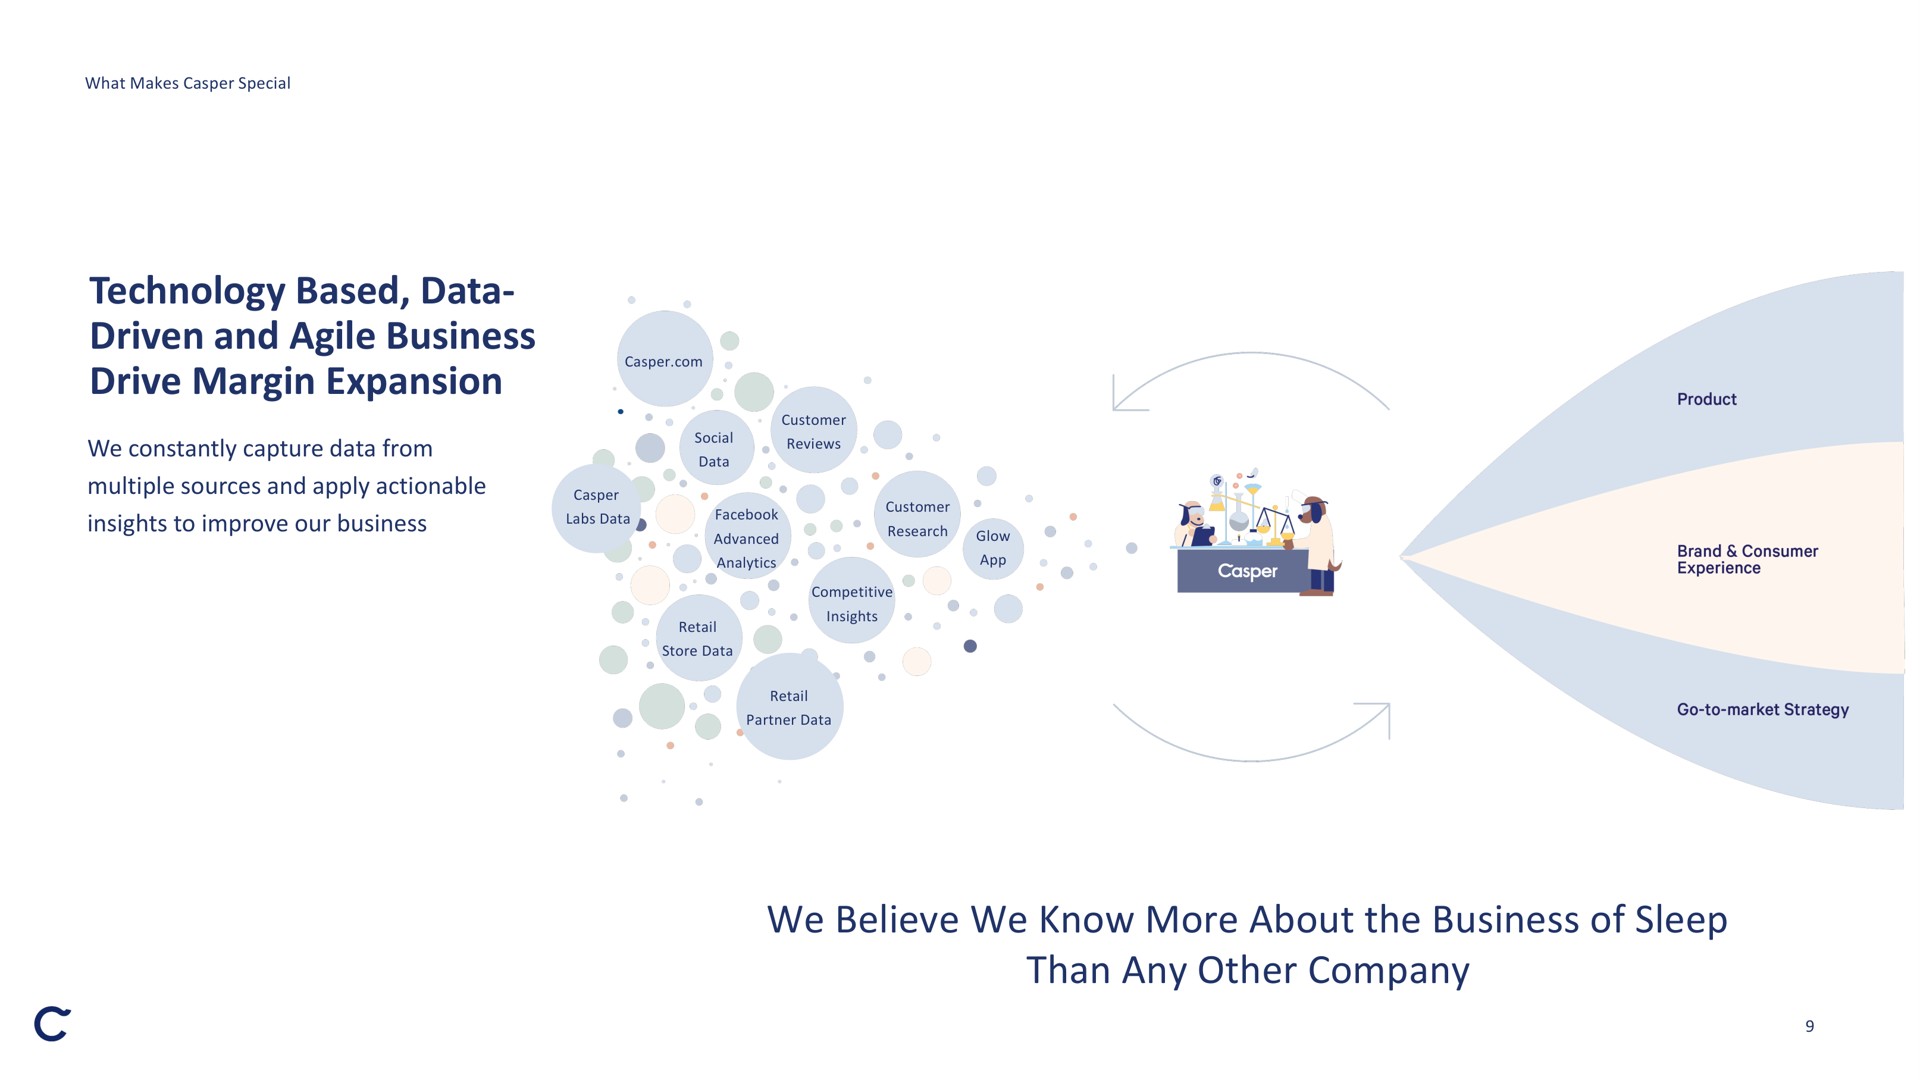 technology based data driven and agile business drive margin expansion we believe we know more about the business of sleep than any other company i a pounce | Casper